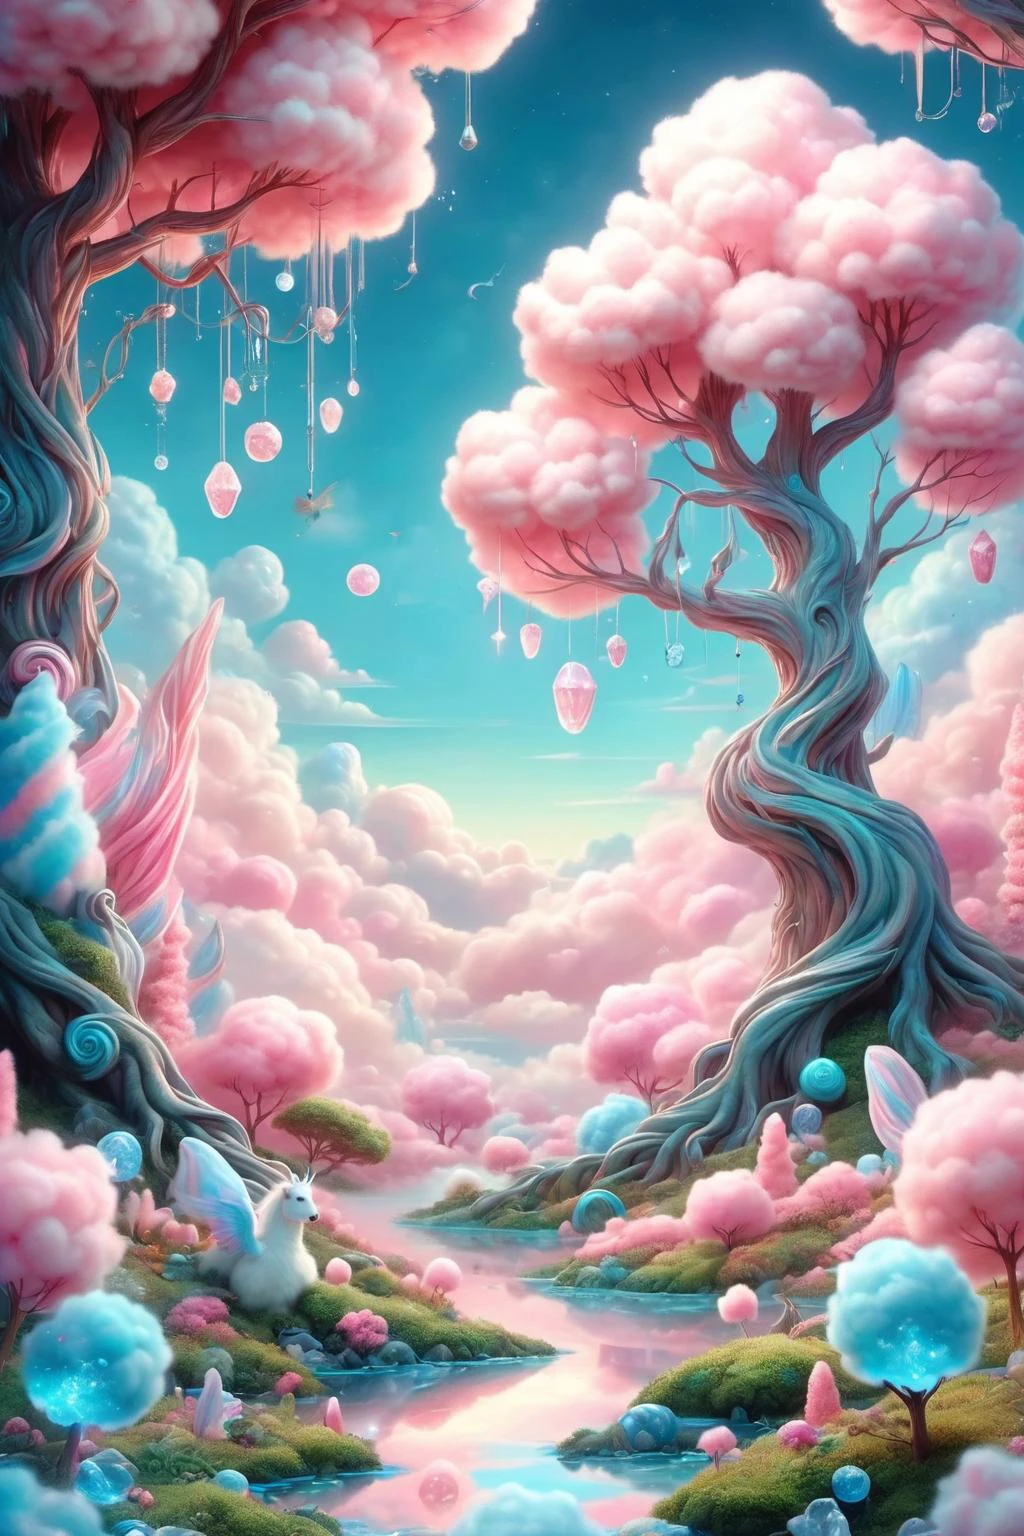 cottoncandy,
In a dreamlike realm stands a colossal tree with cotton candy-like foliage,beneath which exists a whimsical mini-ecosystem. Towering branches of this magical tree filter through dazzling rays of light,weaving an enchanting world of fairy tale illumination. Surrounding the grand tree are mythical creatures such as unicorns and phoenixes,amidst a wonderland where peculiar plants like candy vines and crystal fruits flourish. This scene seamlessly blends nature with fantasy,resembling a fantastical painting brought to life from dreams,
UHD,Extreme detail,natural light,volume light,fantasism,